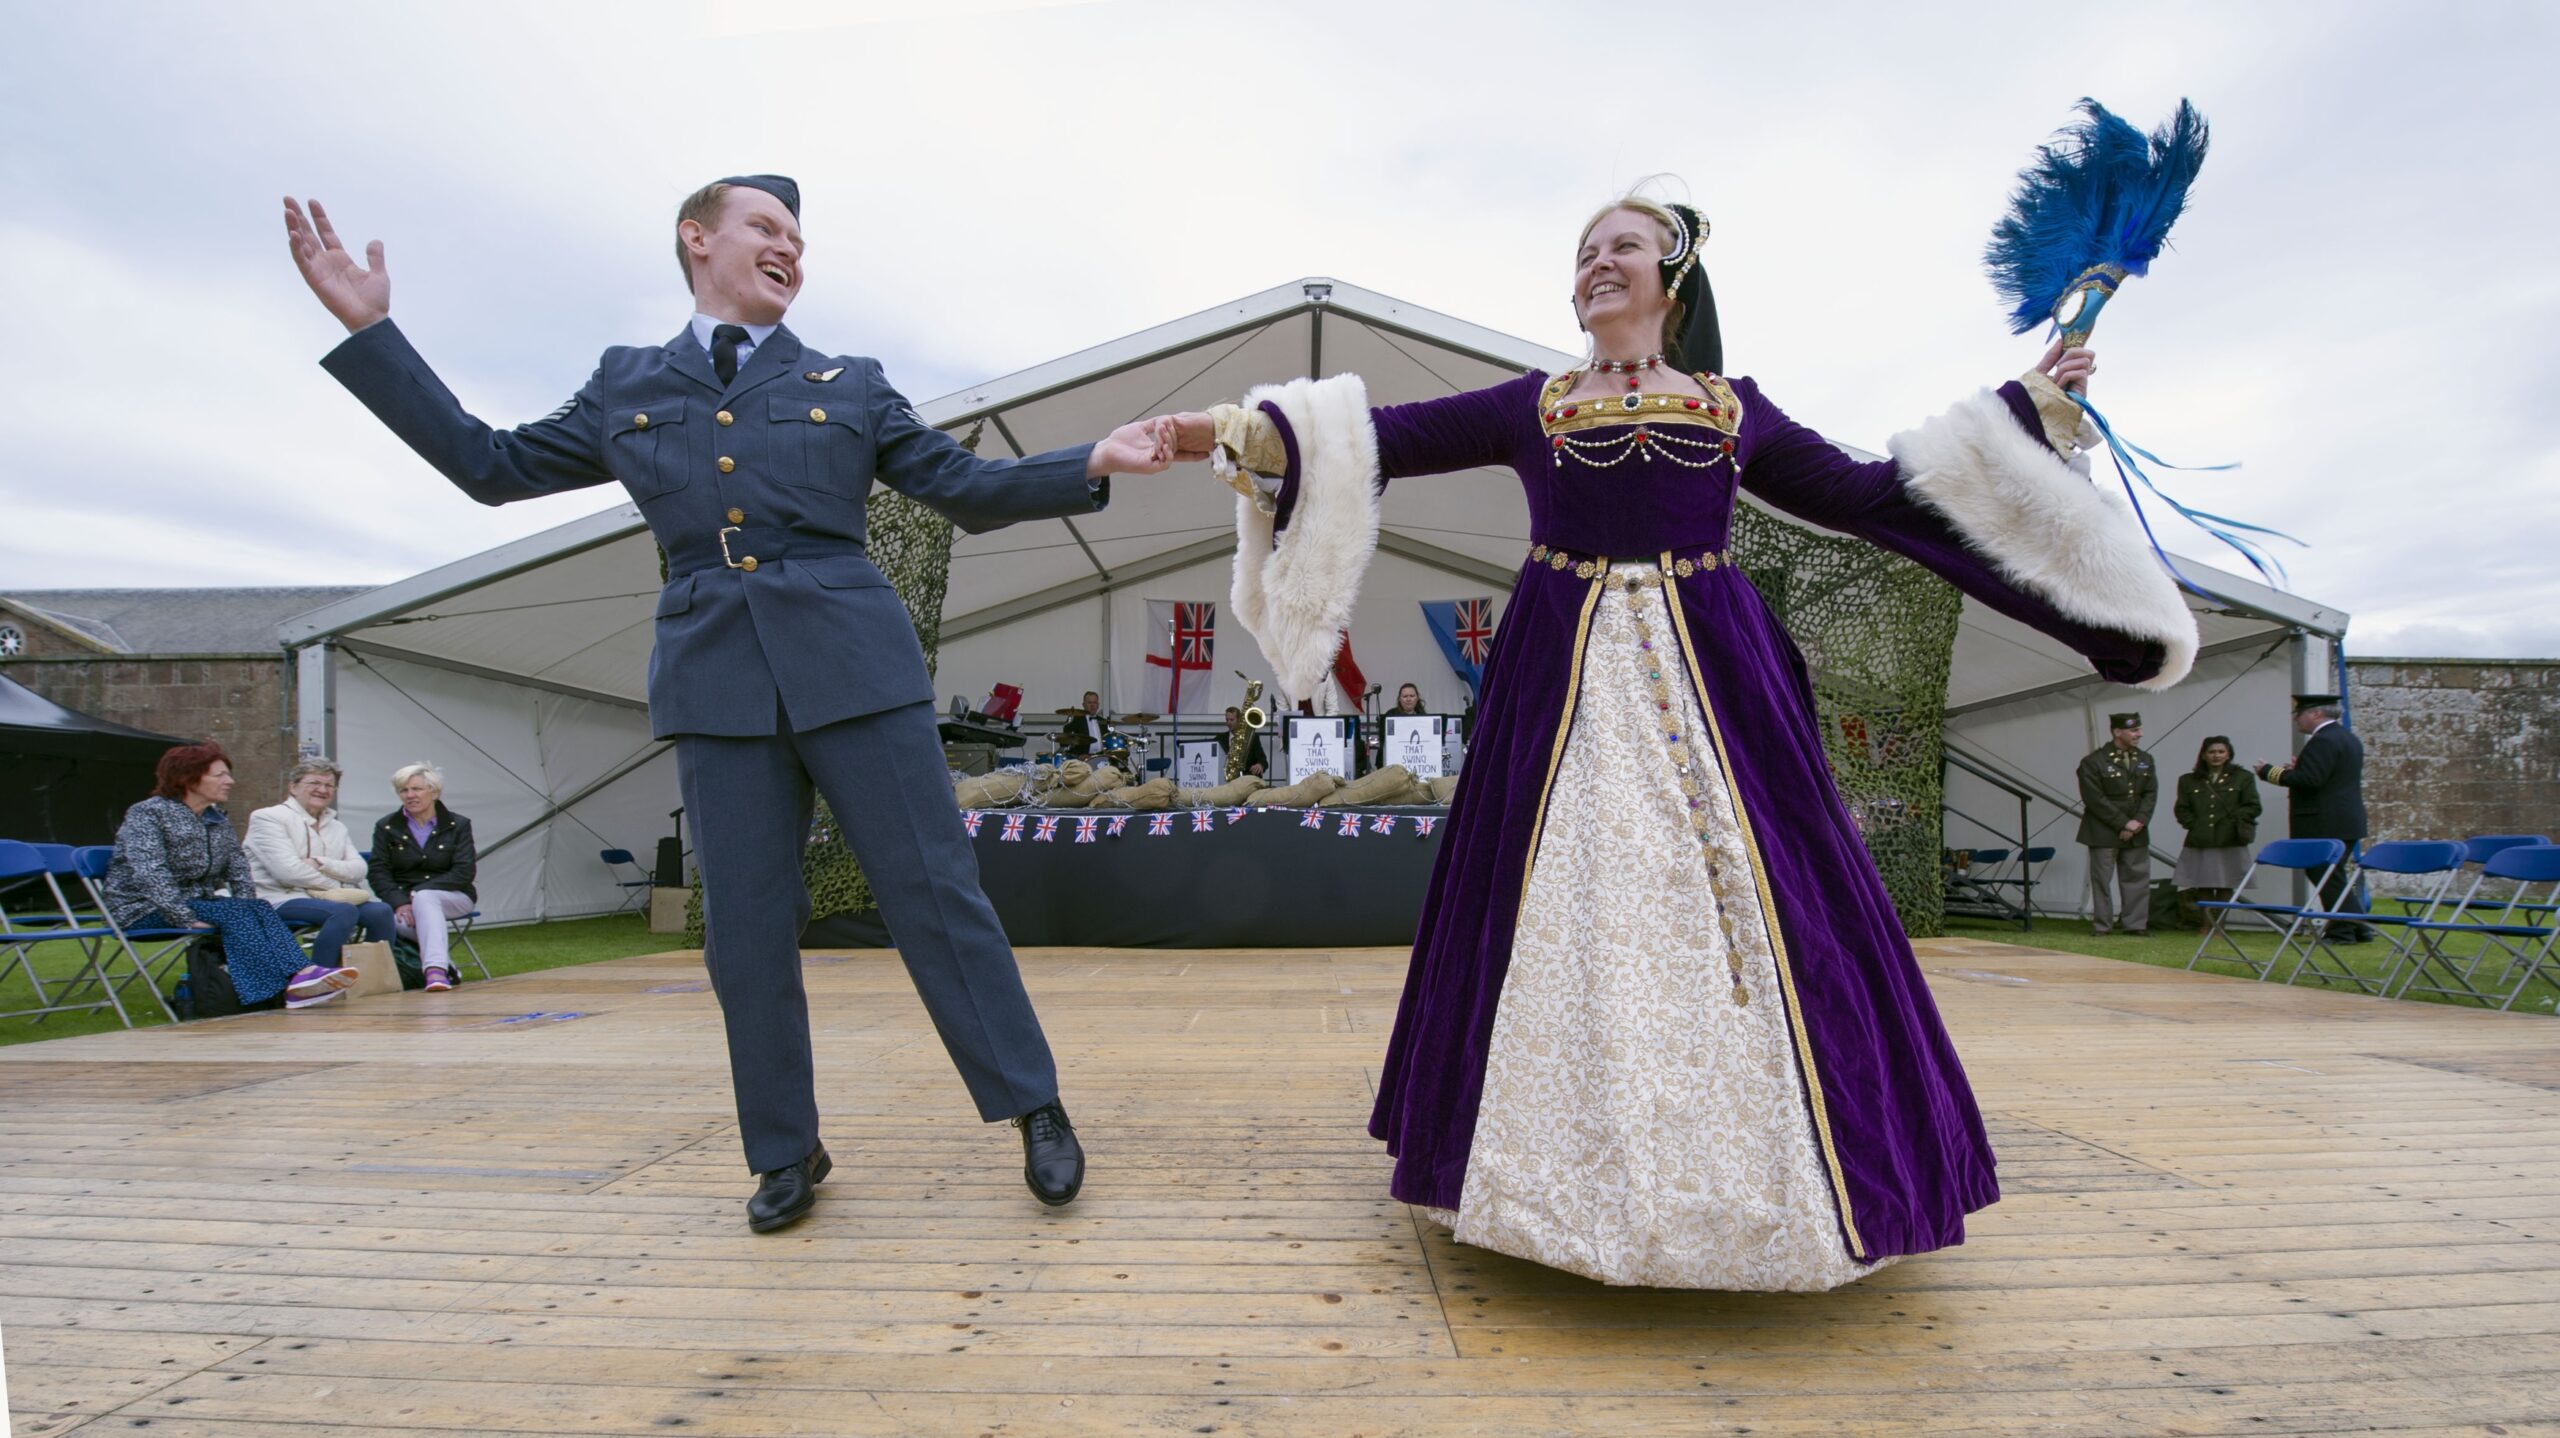 A women dressed in a purple, medieval dress dancing with a man dressed as a WWII solider at Celebration of the Centuries